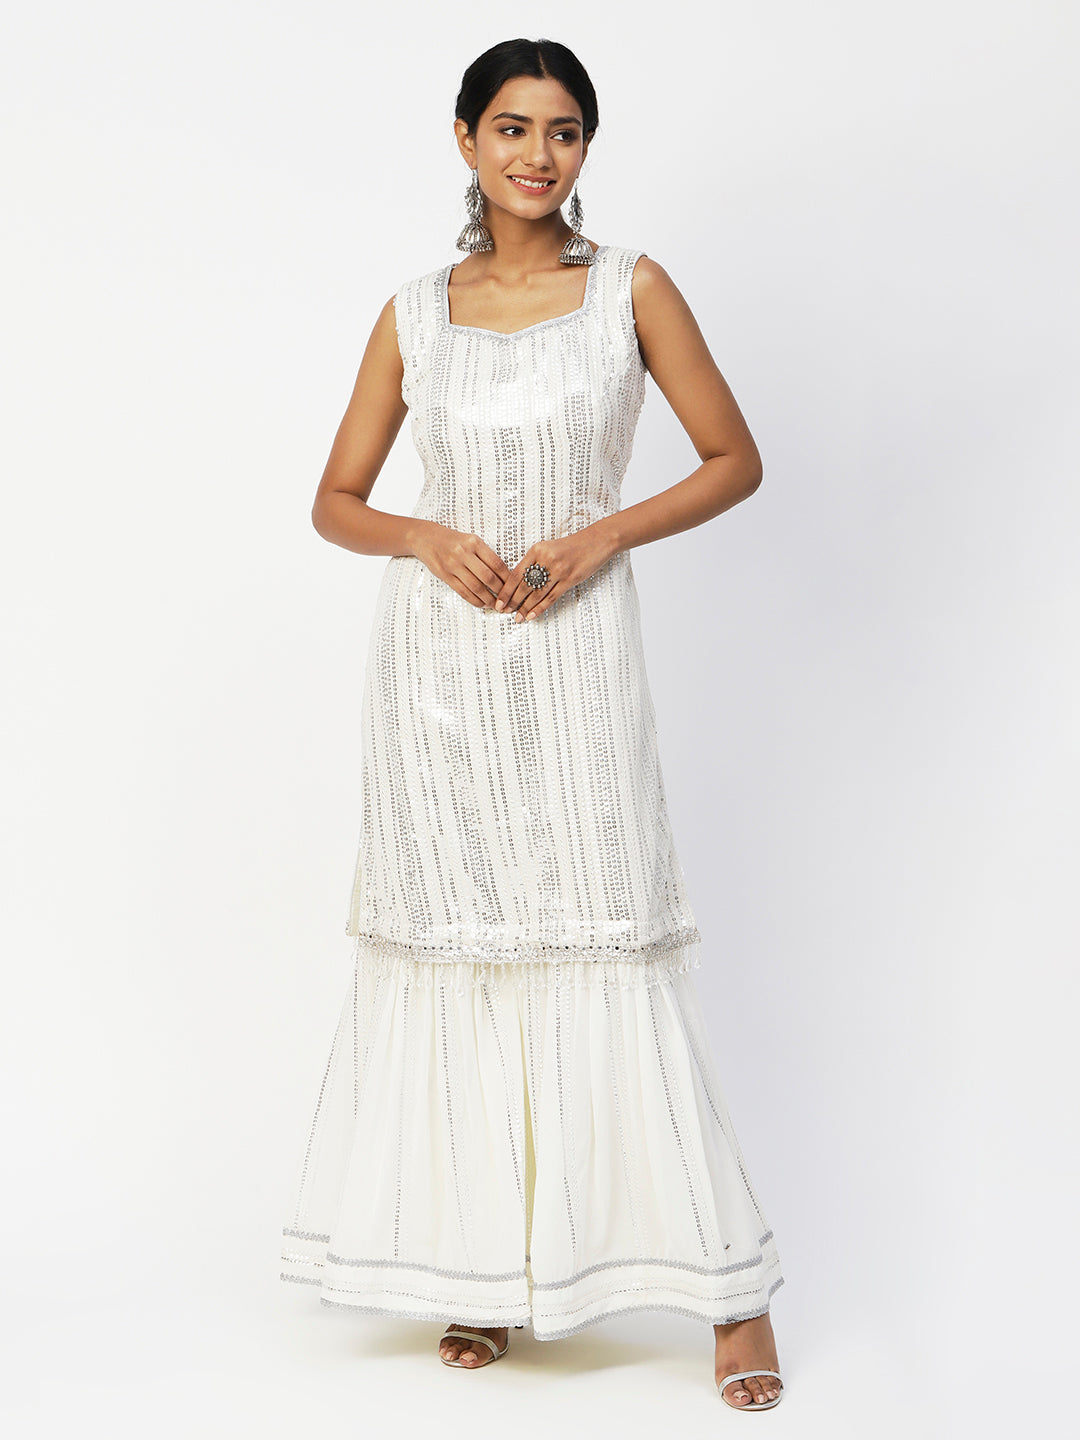 White Georgette Sharara Suit with Silver Sequin Embellishments - PepaBai